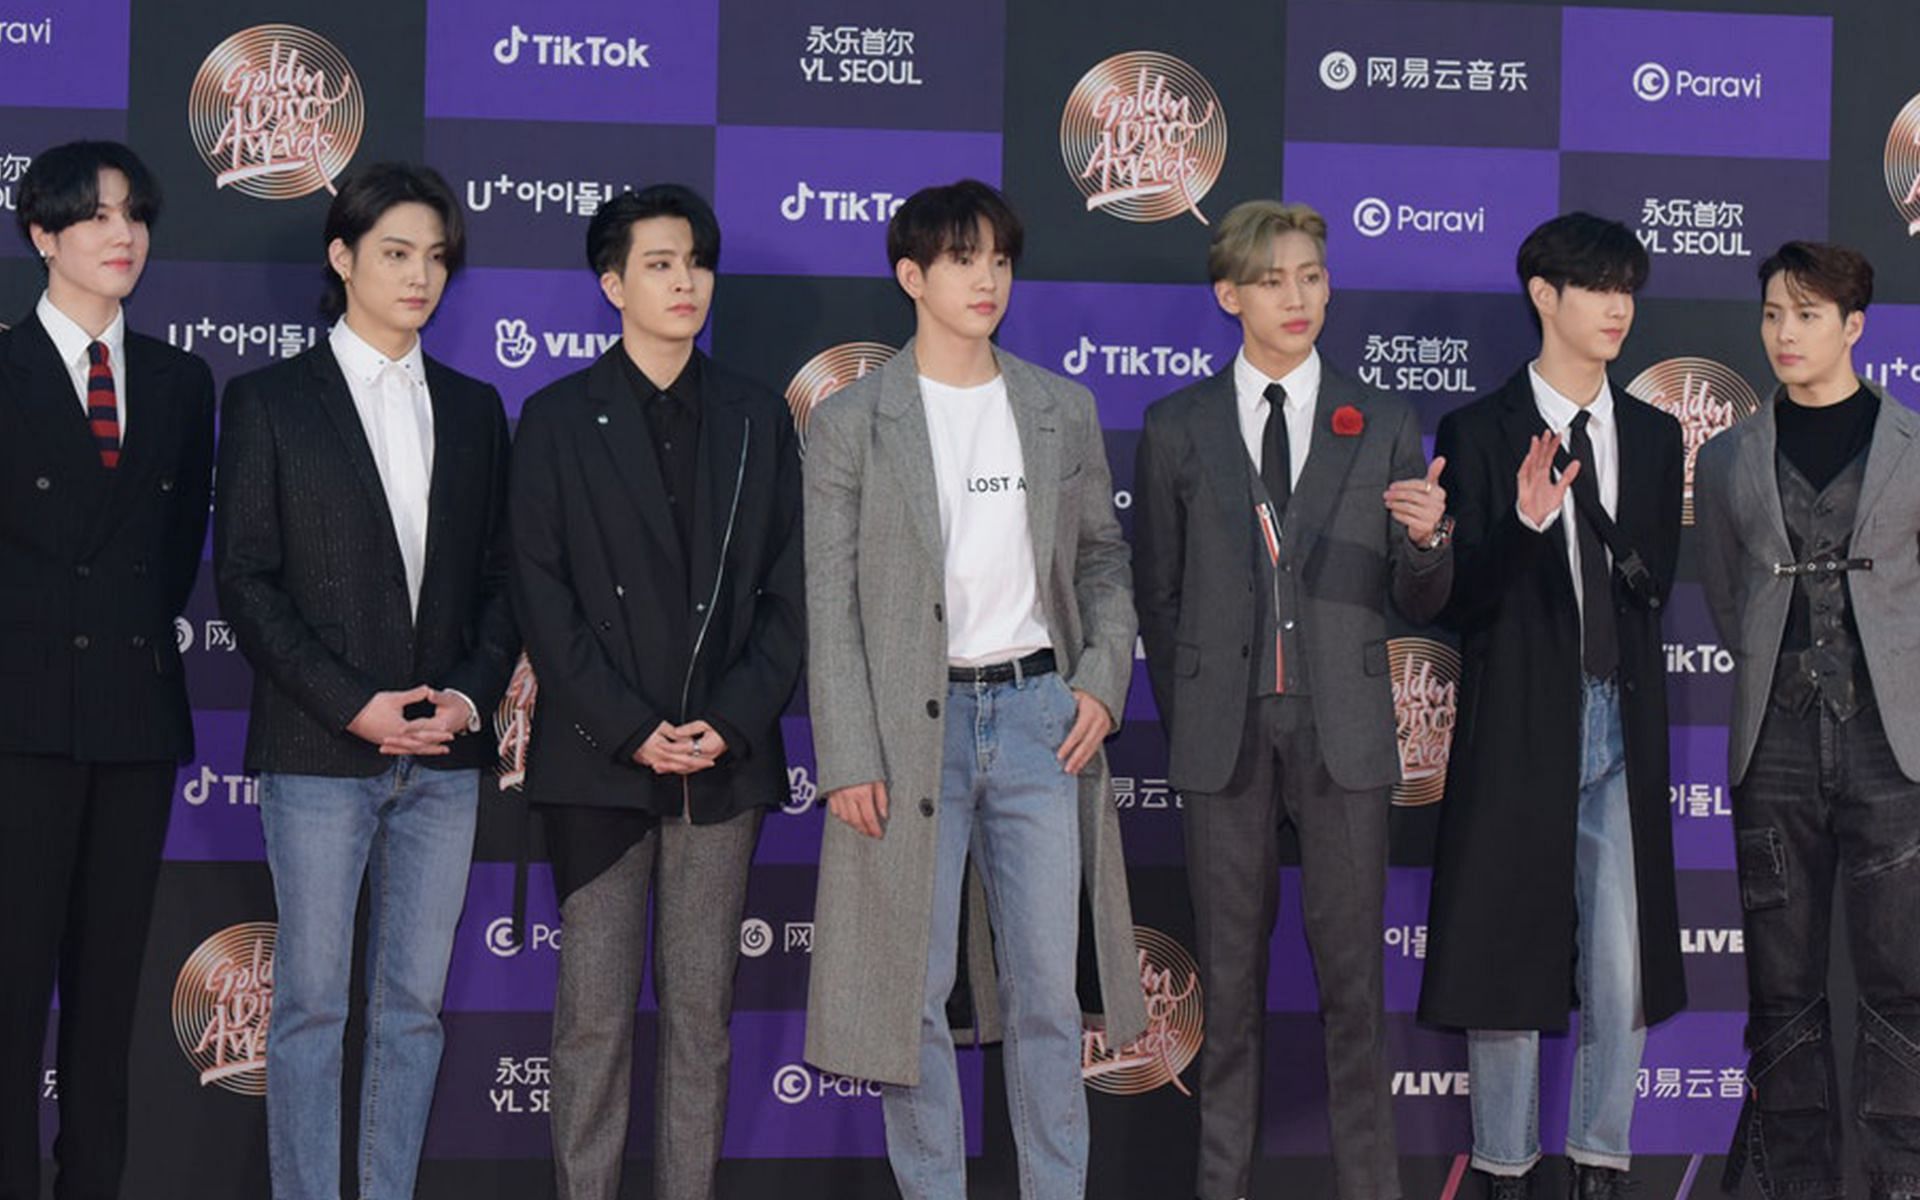 GOT7 is set to make a full comeback in May (Image via The Chosunilbo JNS/Getty Images)